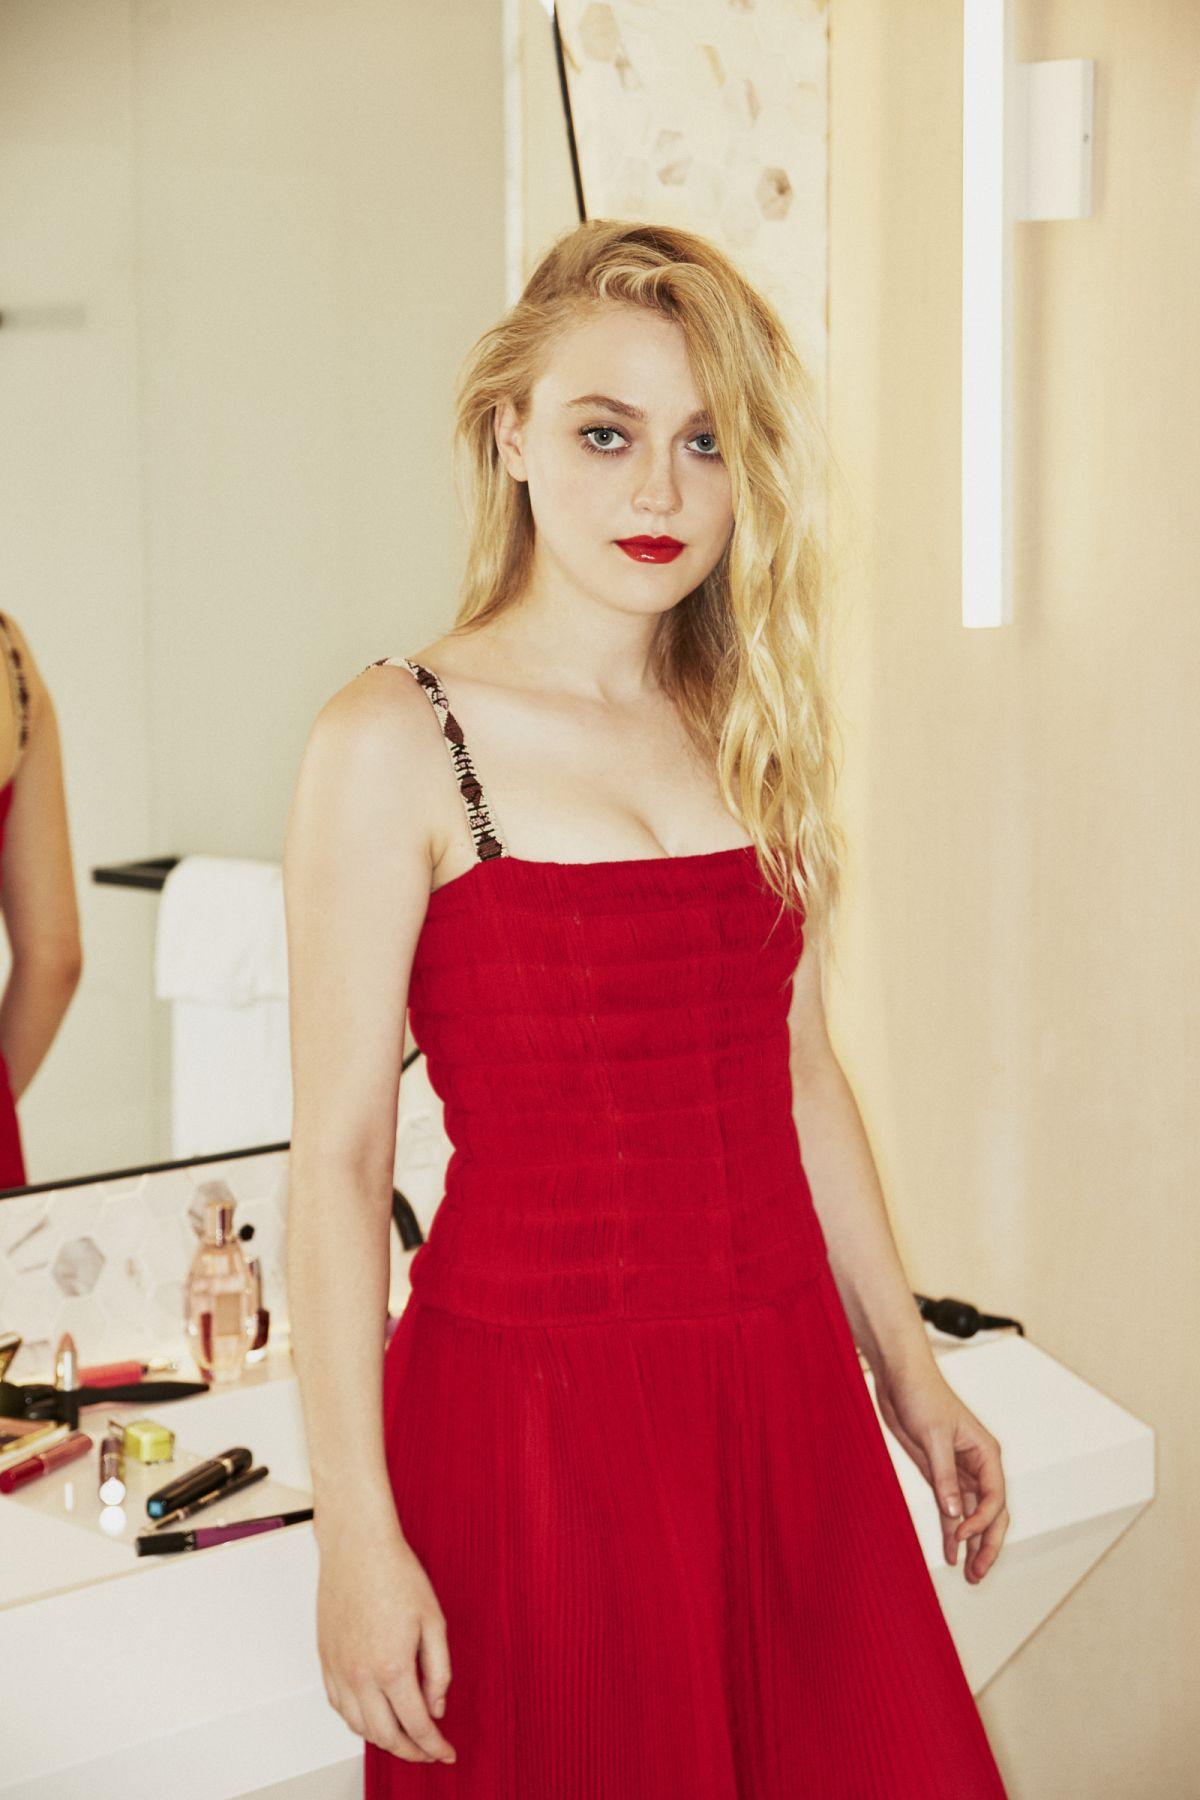 75+ Hot Pictures Of Dakota Fanning Are Truly Epic | Best Of Comic Books